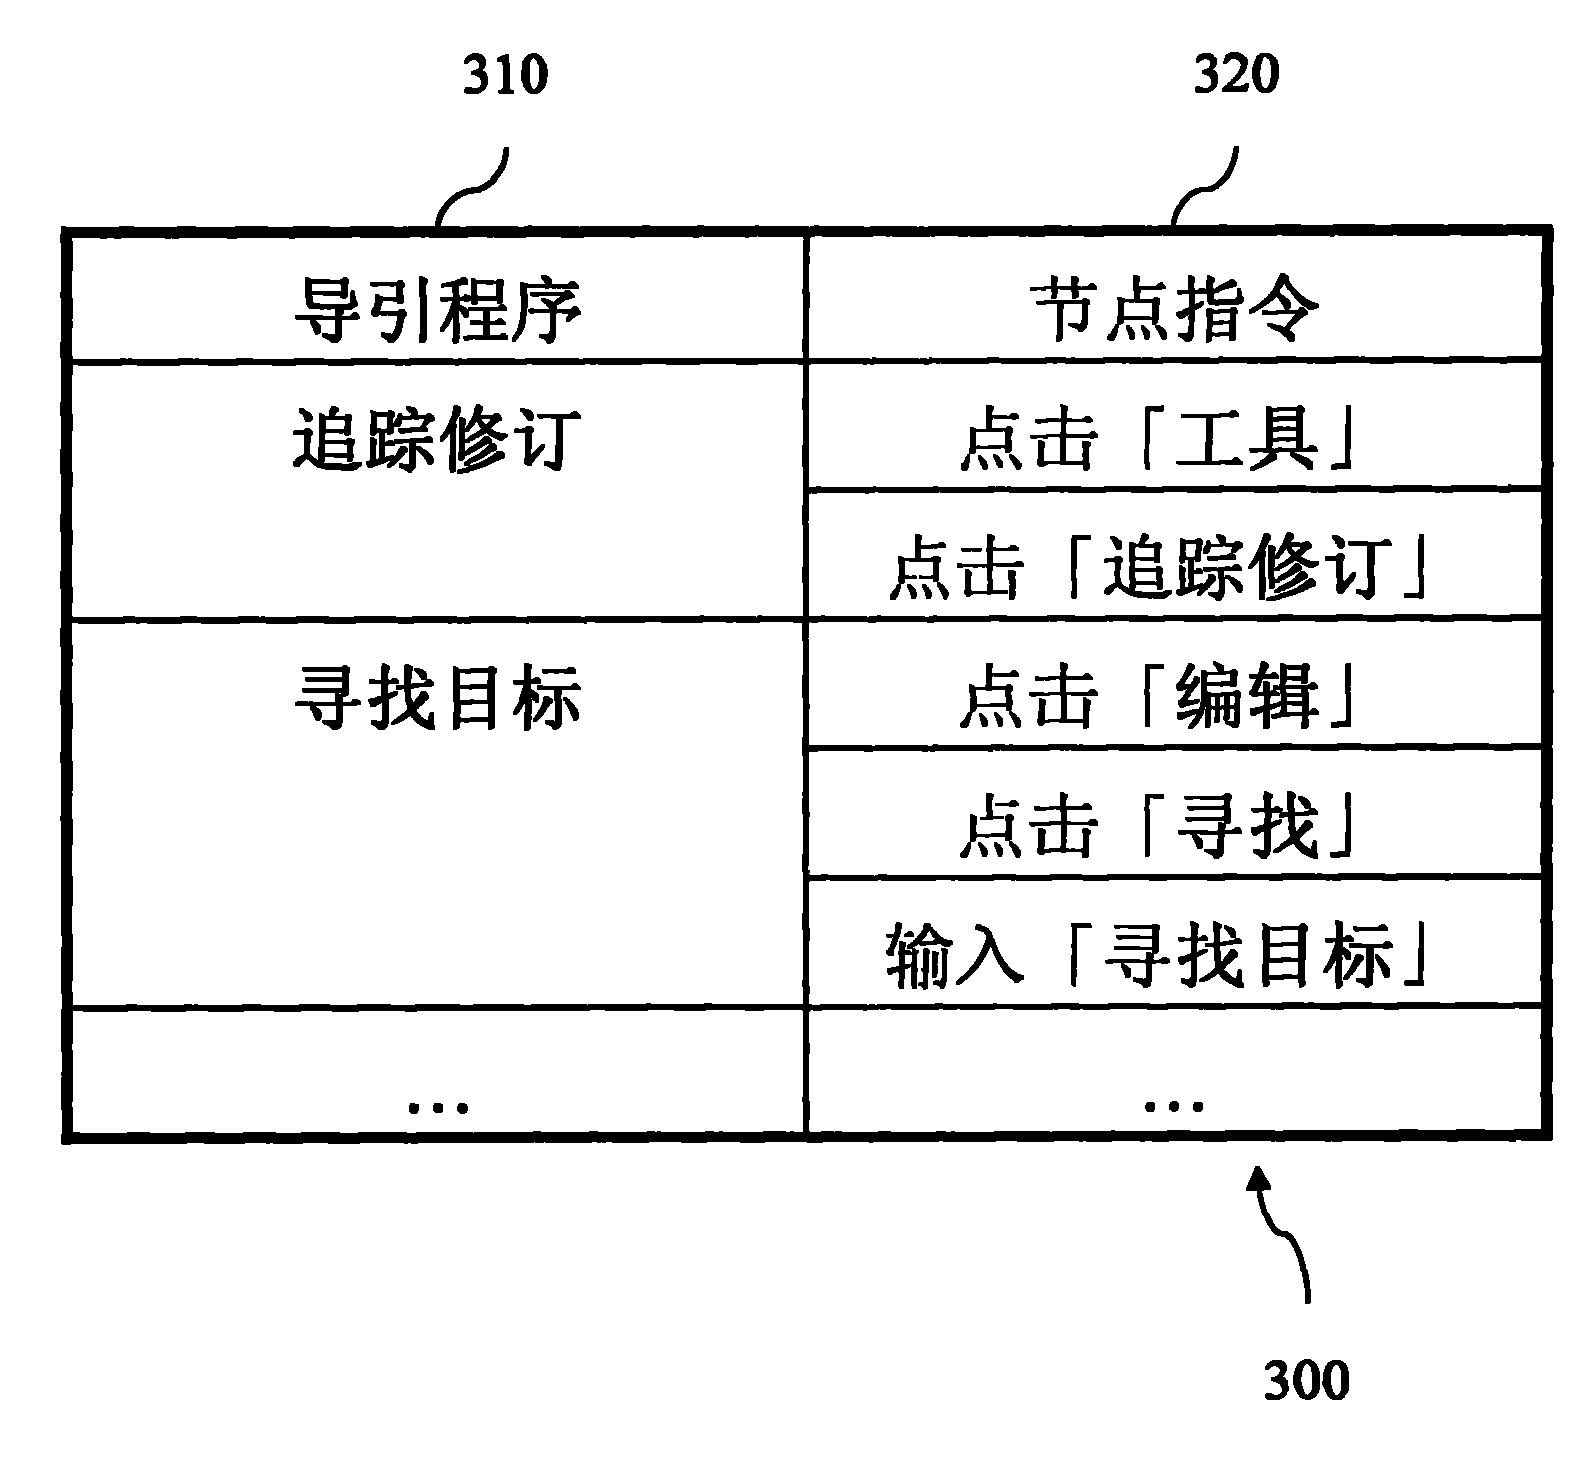 Operation guide interactive system and method